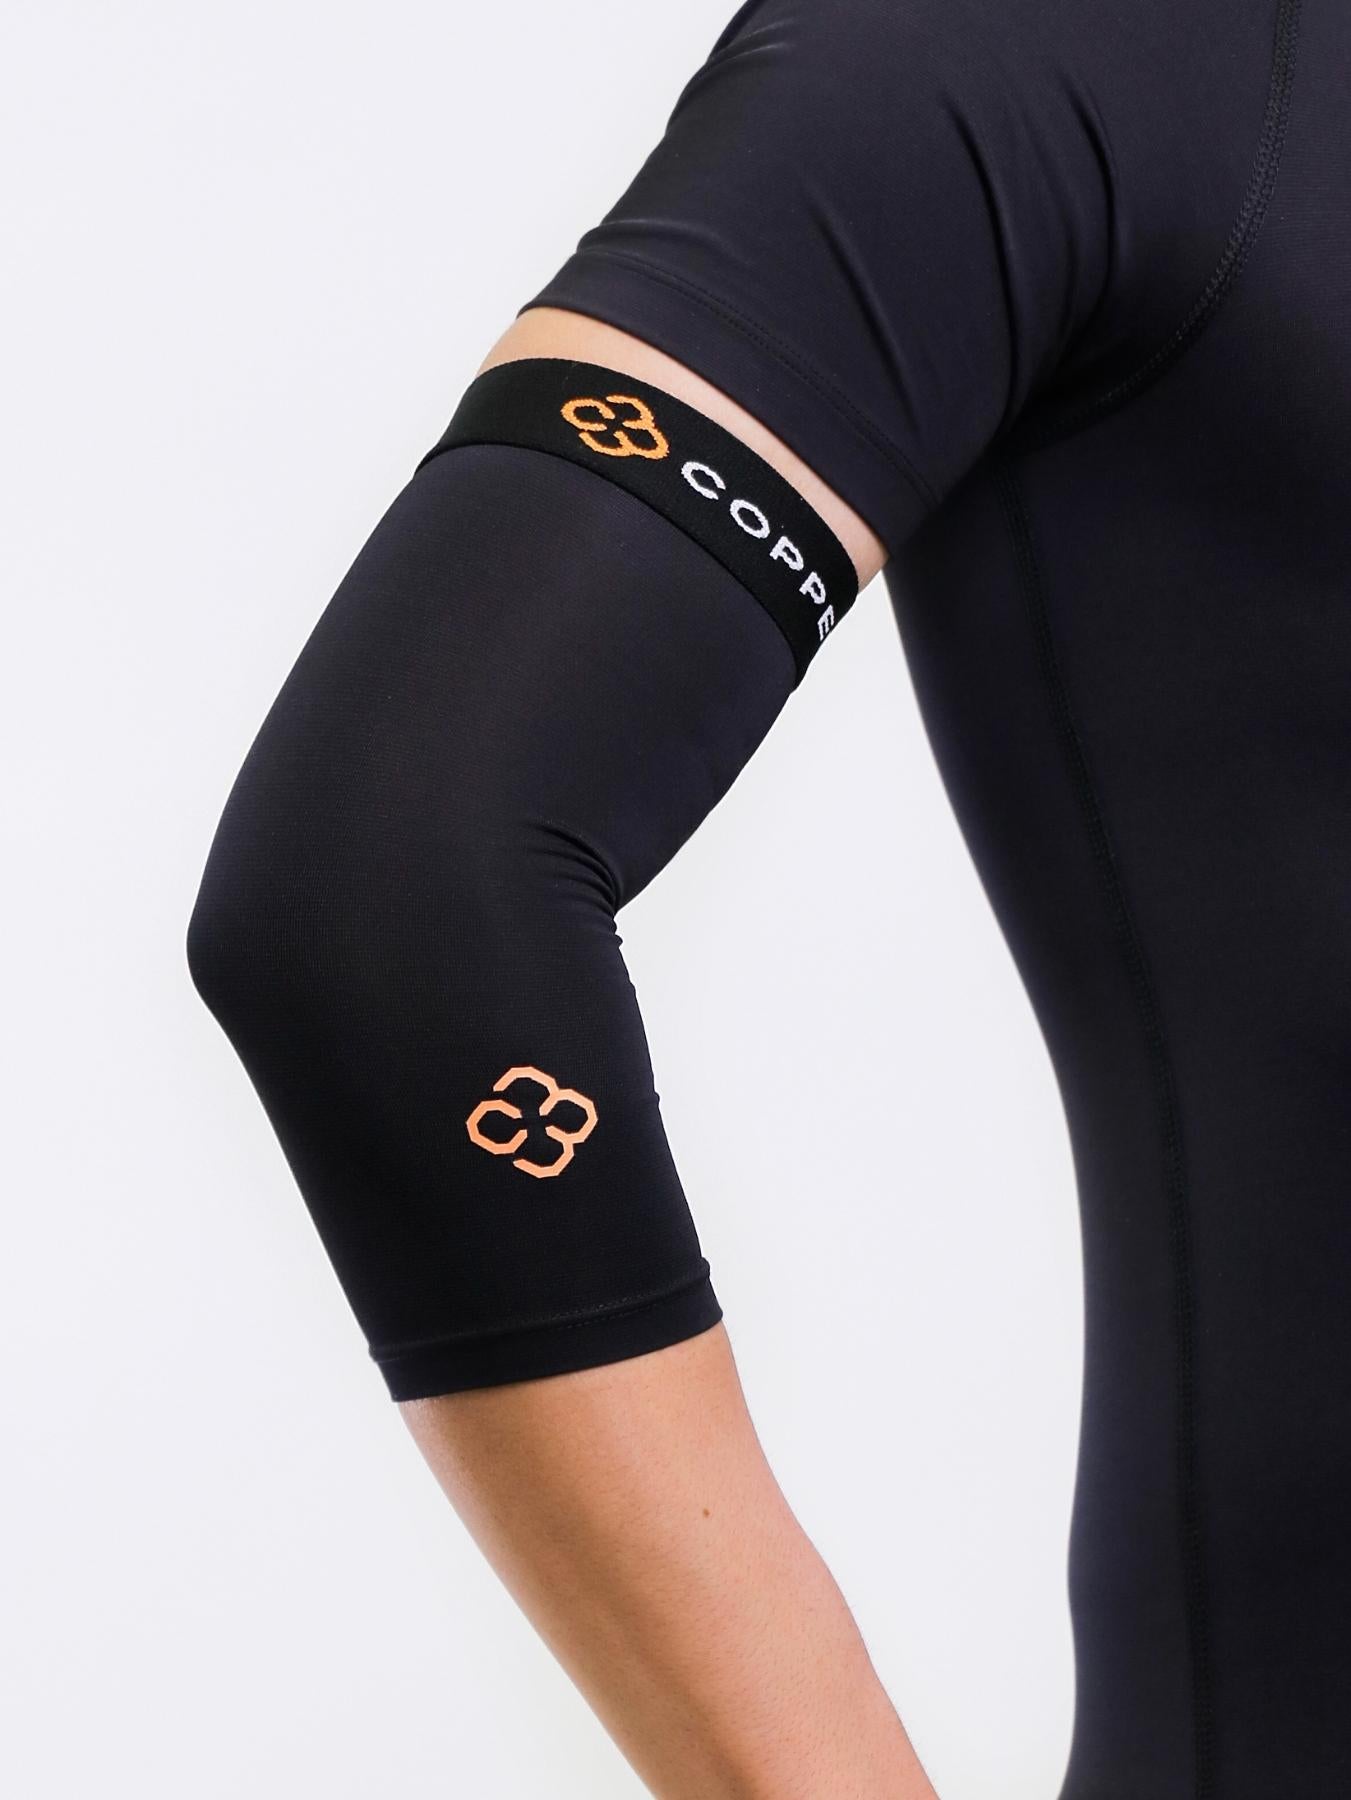 Copper Compression Elbow Sleeve - Unisex – Copper 88